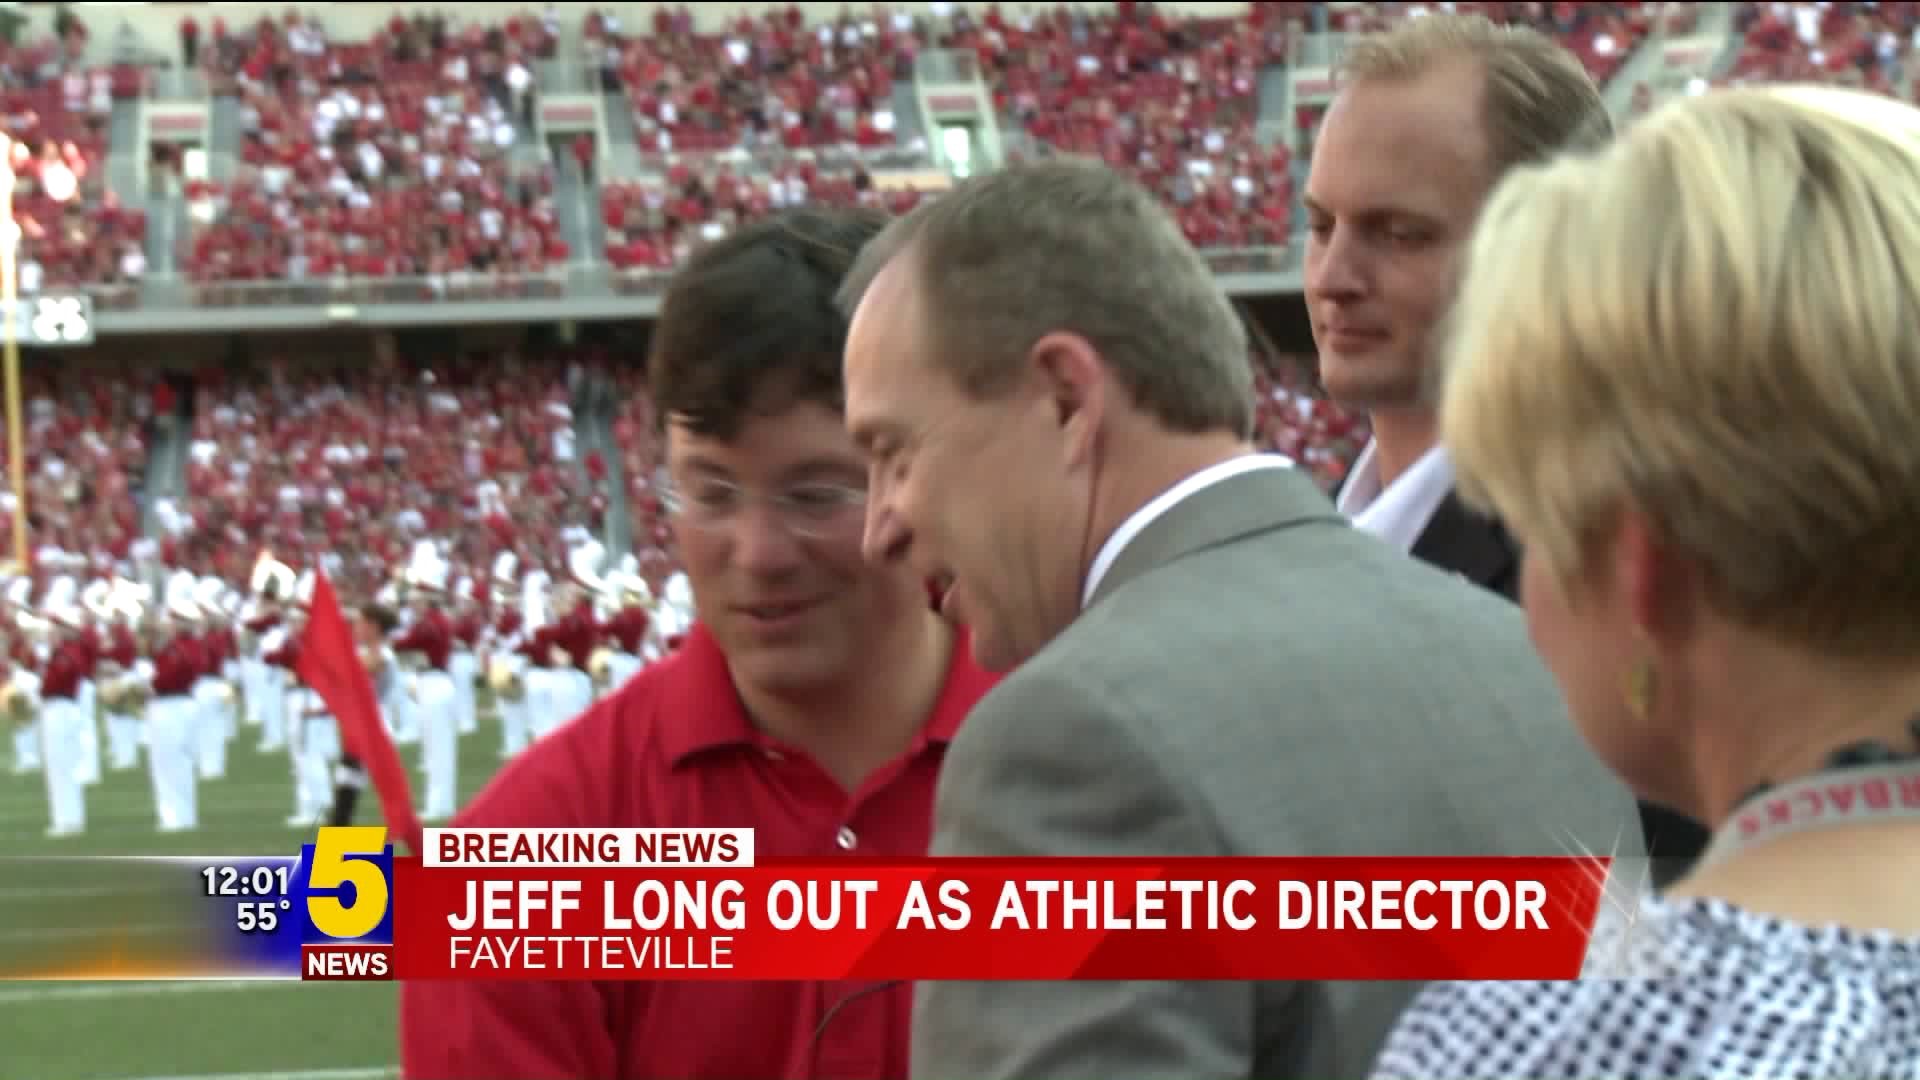 Jeff Long Out As Athletic Director